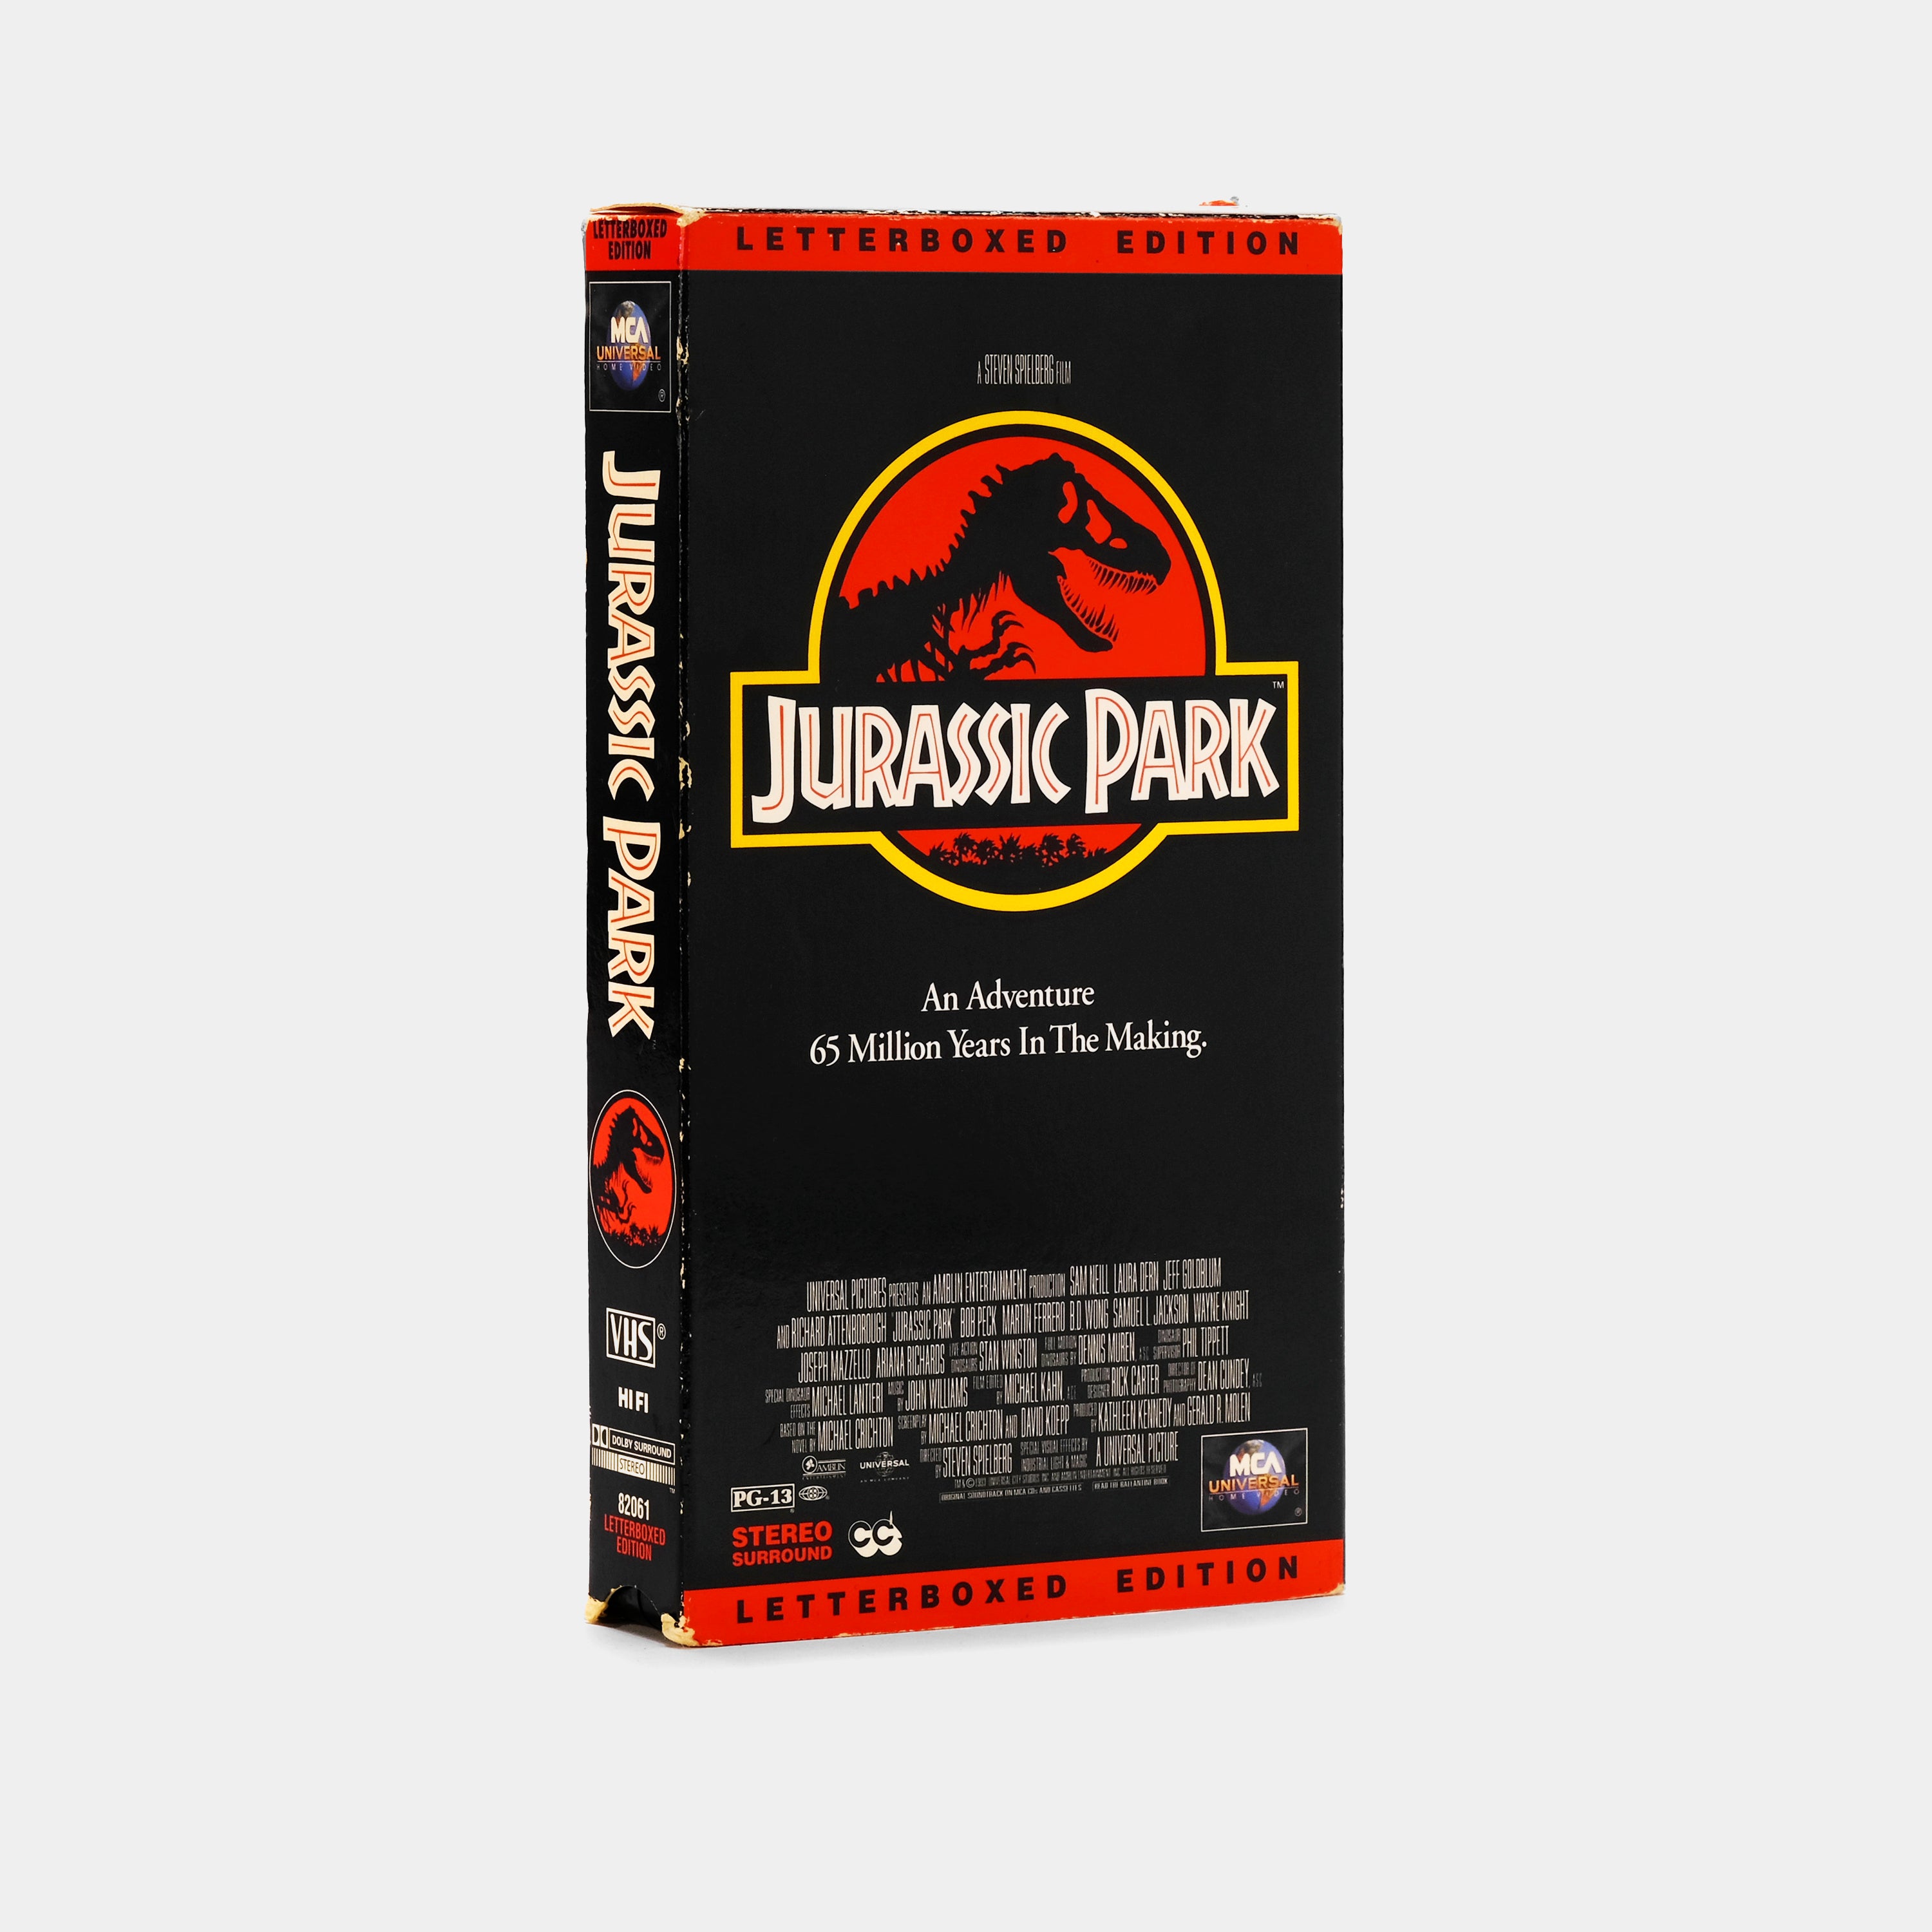 Jurassic Park (Letterboxed Edition) VHS Tape